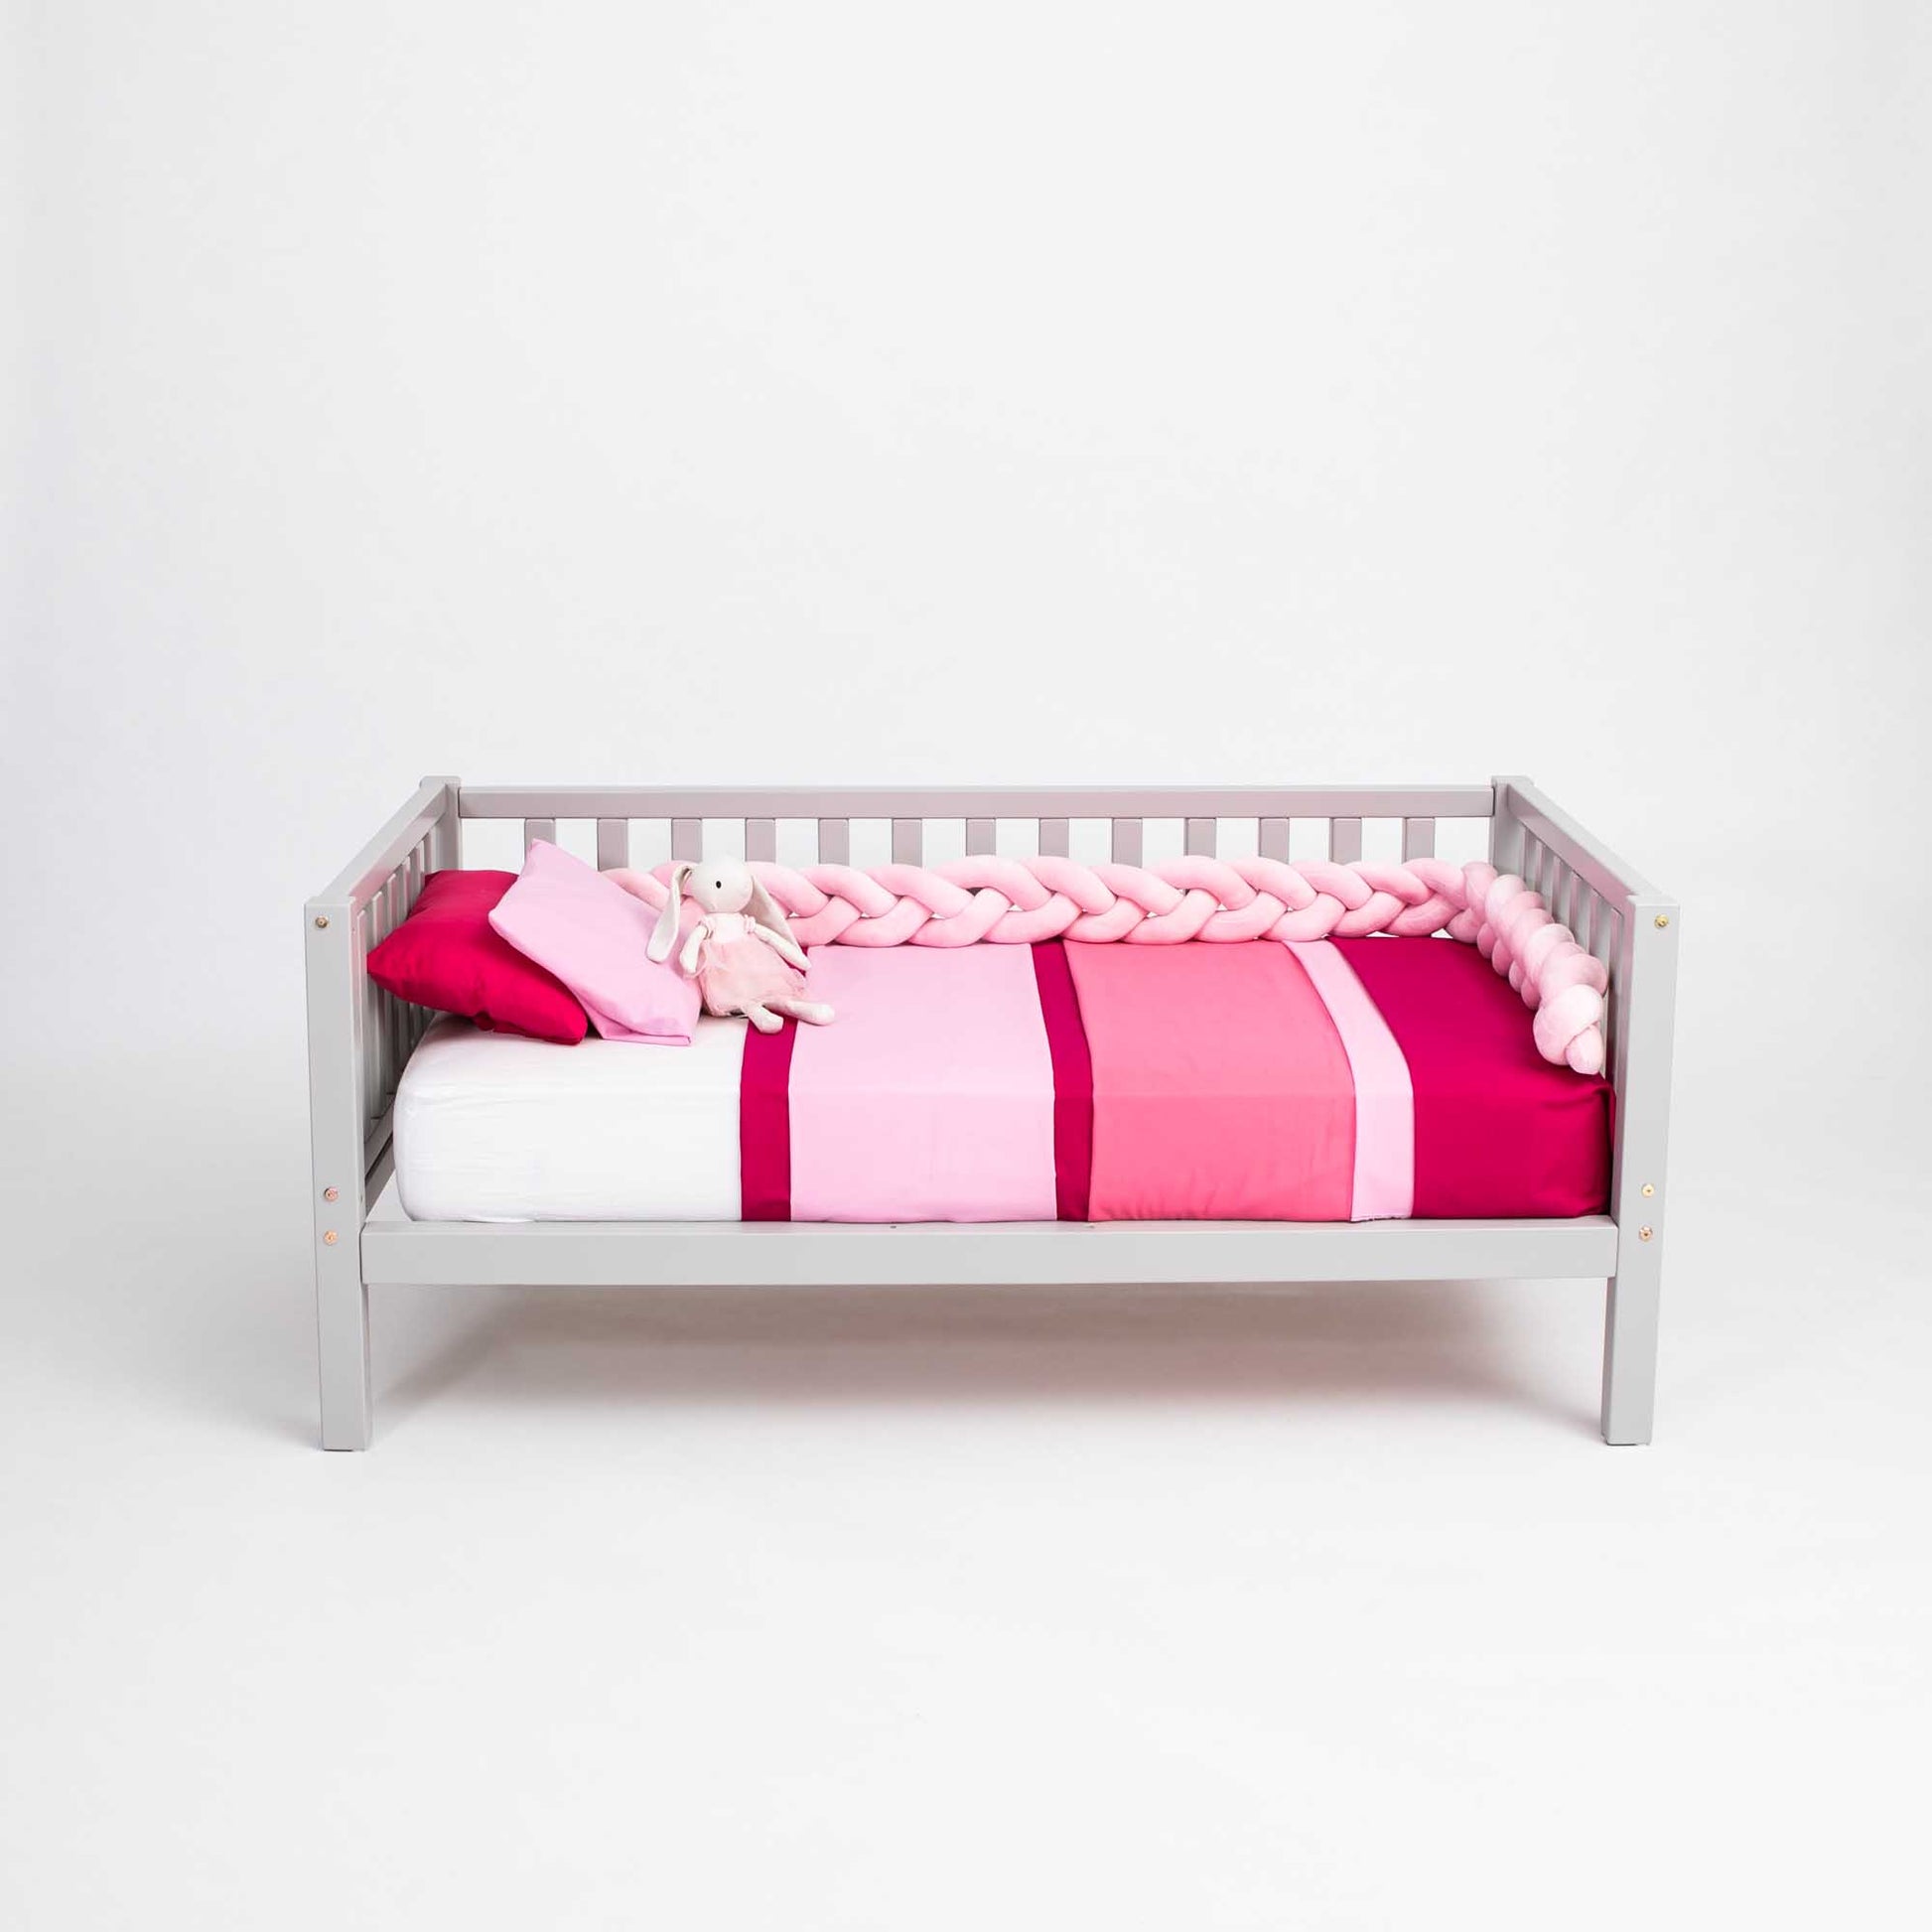 A Kids' platform bed on legs with 3-sided rails from Sweet Home From Wood with a pink blanket.